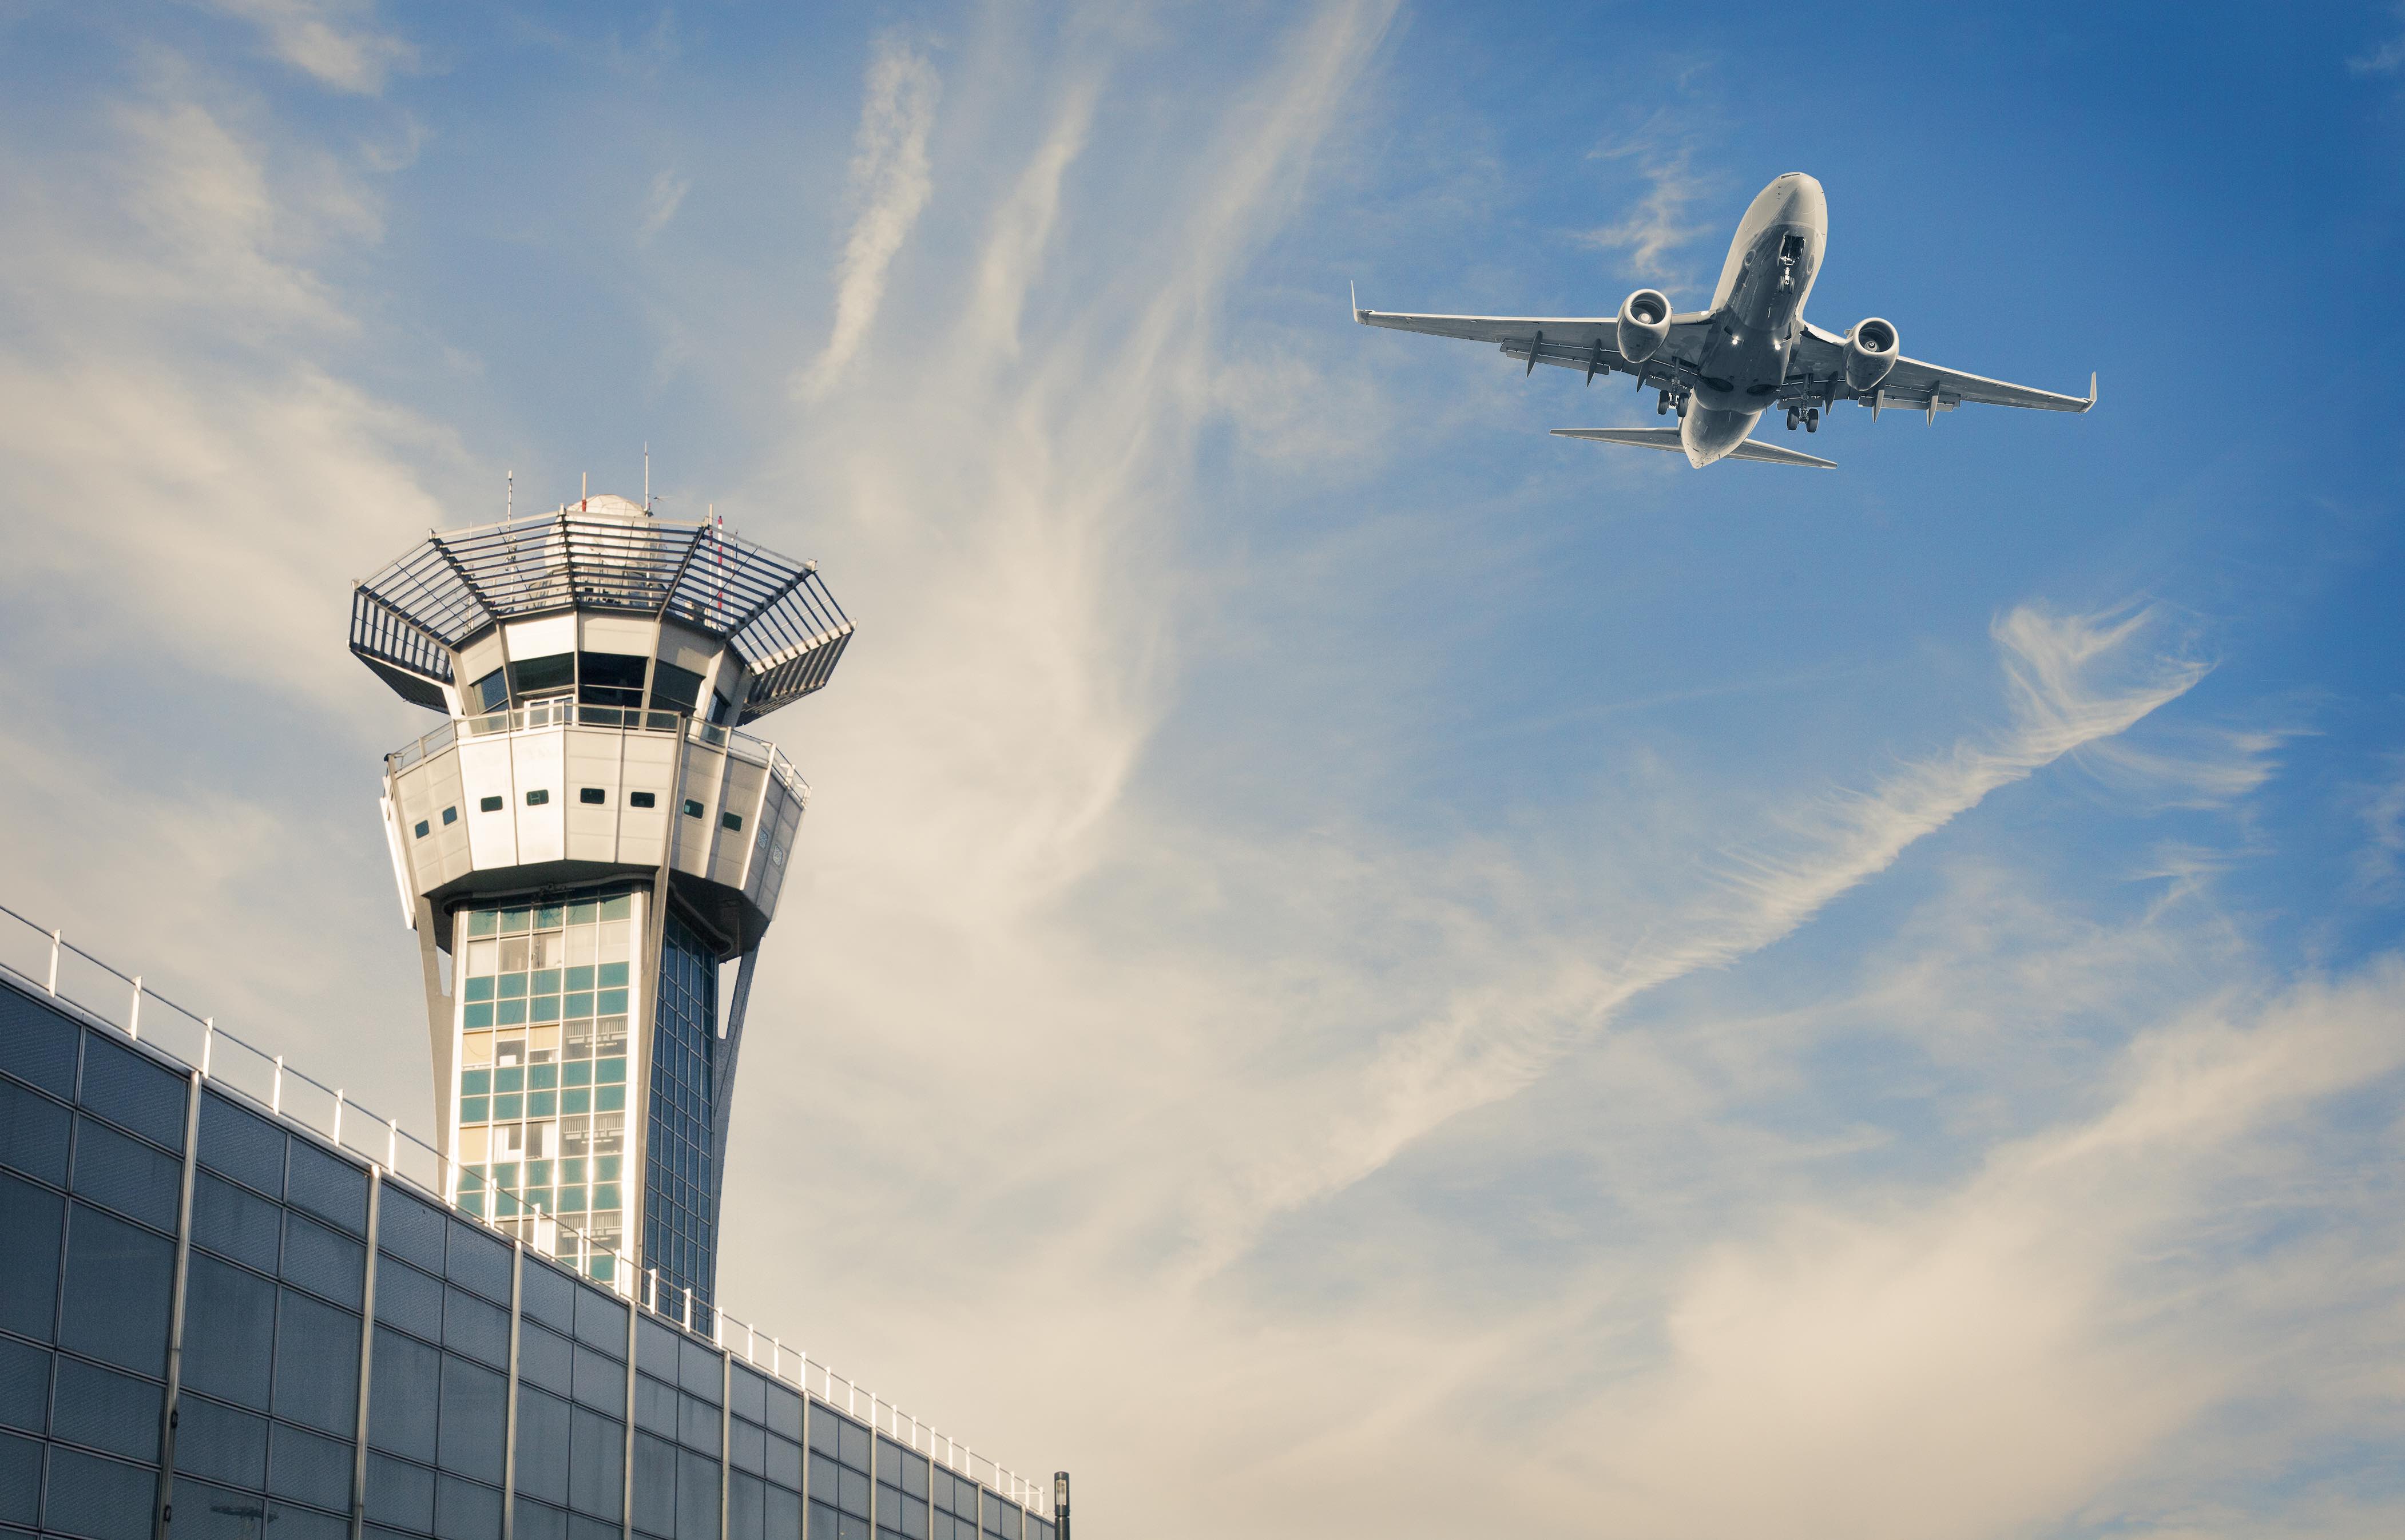 GNSS Spoofing and Aviation: An Evolving Relationship